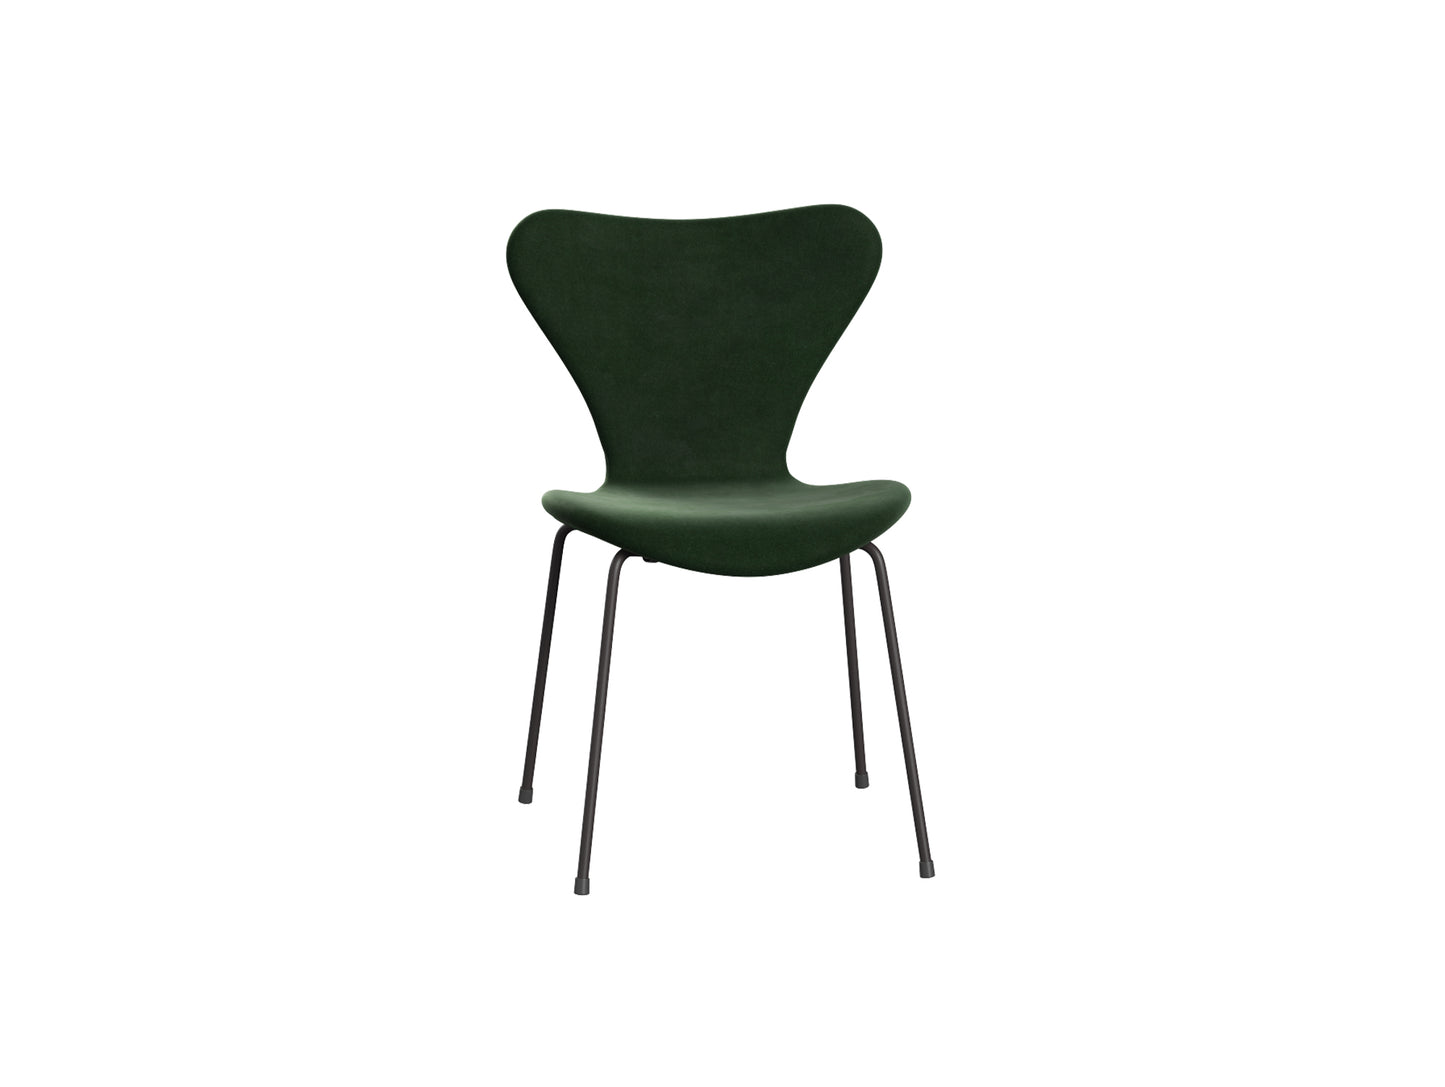 Series 7™ 3107 Dining Chair (Fully Upholstered) by Fritz Hansen - Warm Graphite Steel / Belfast Forest Green